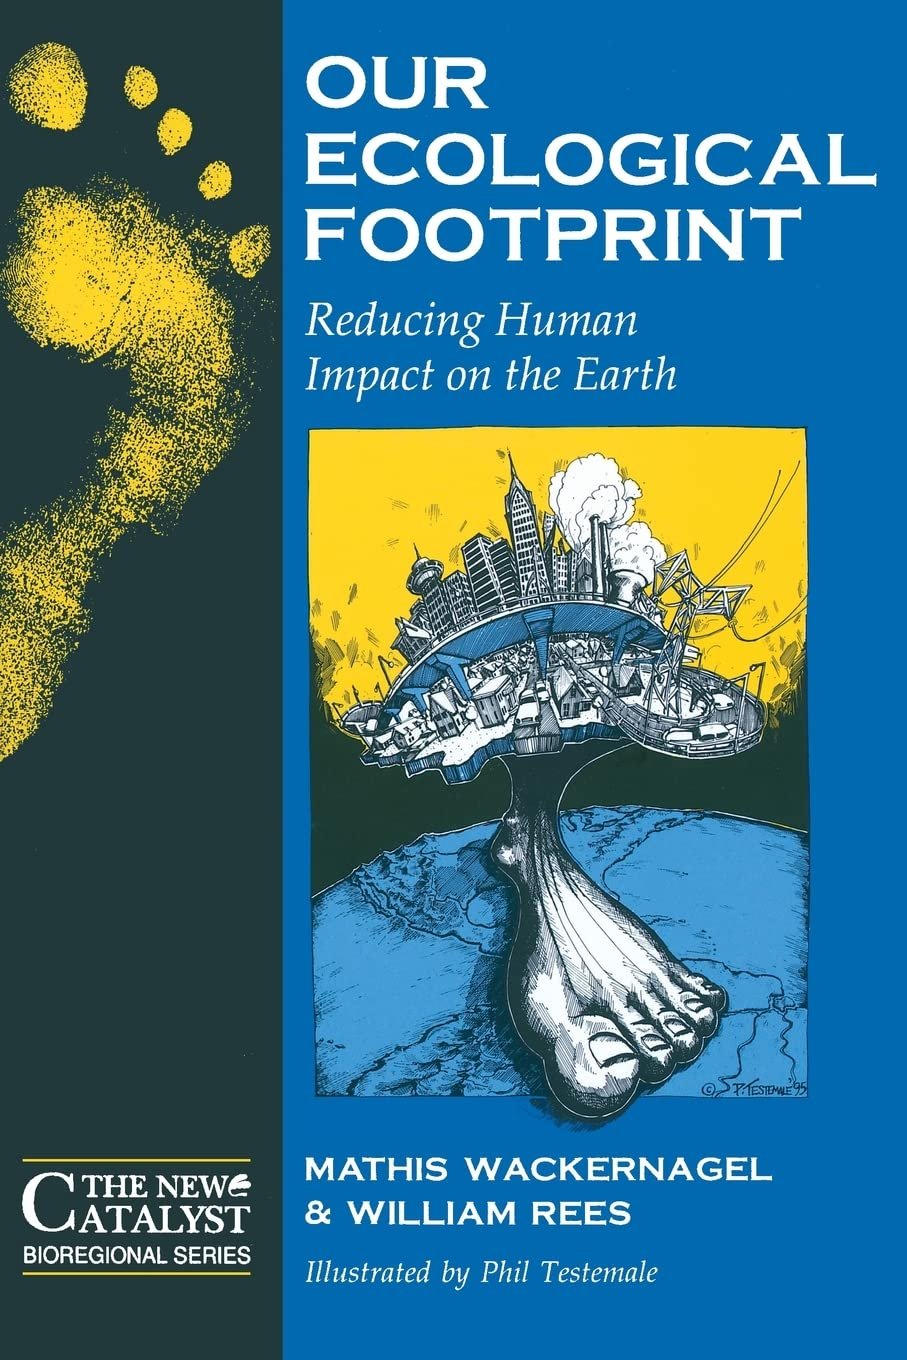 Our Ecological Footprint: Reducing Human Impact on the Earth (New Catalyst Bioregional Series)